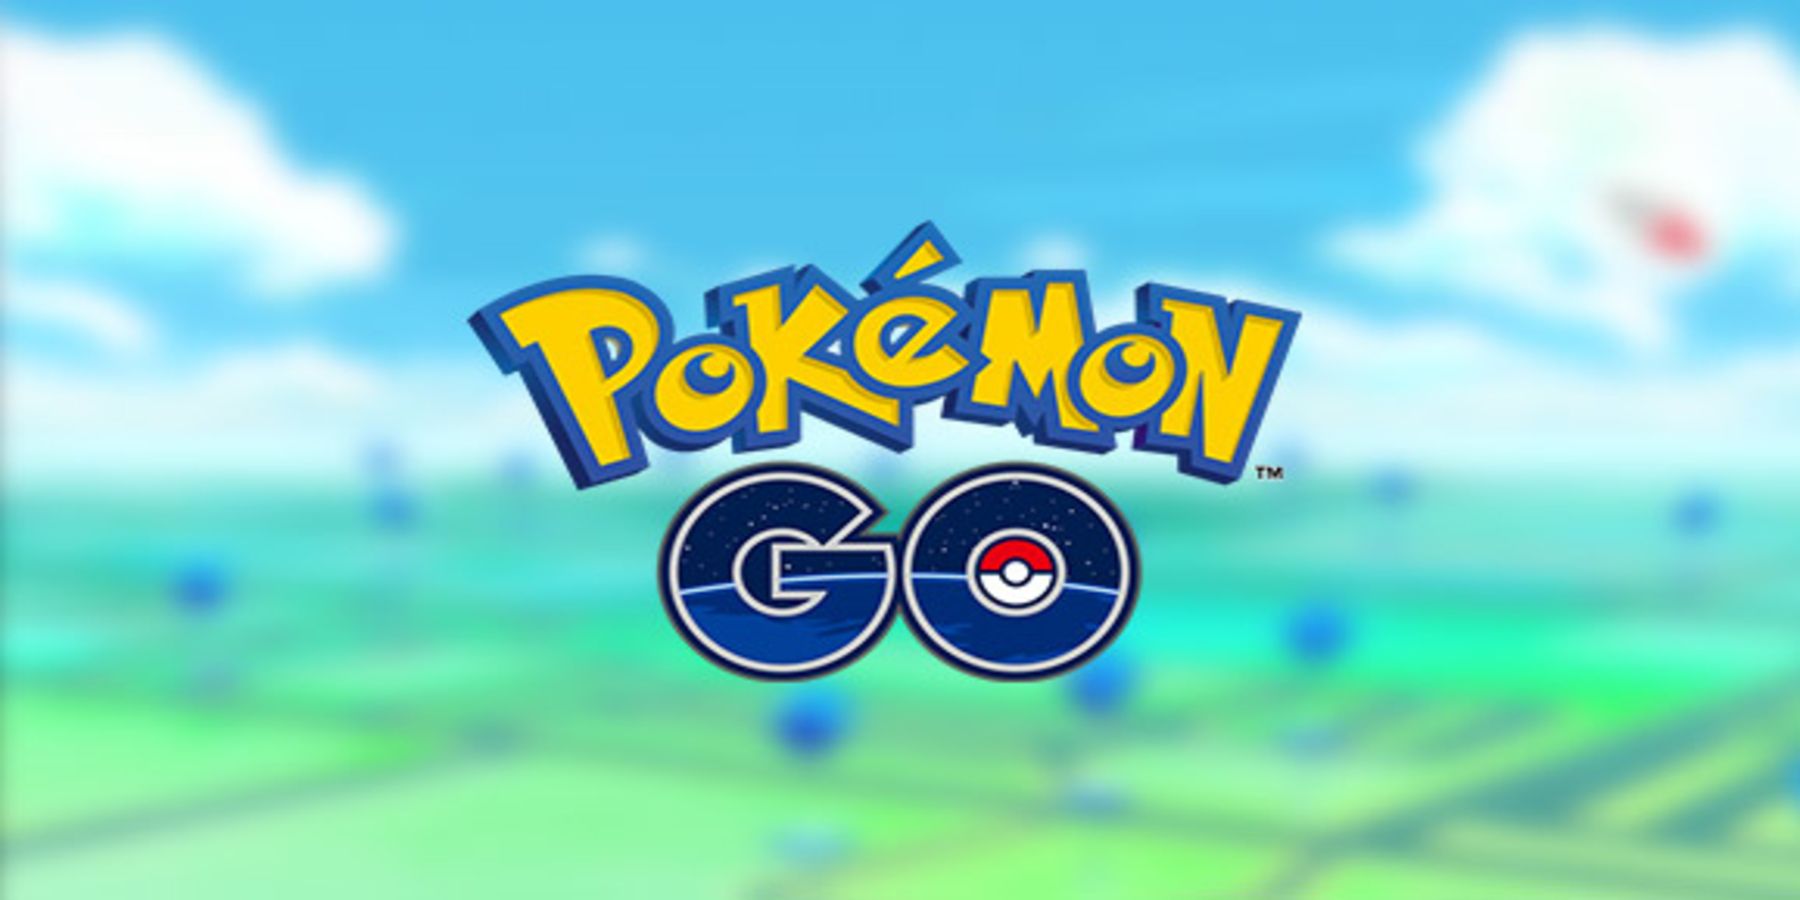 Updated Pokemon GO Loading Screen Hints at New Pokemon for 2022